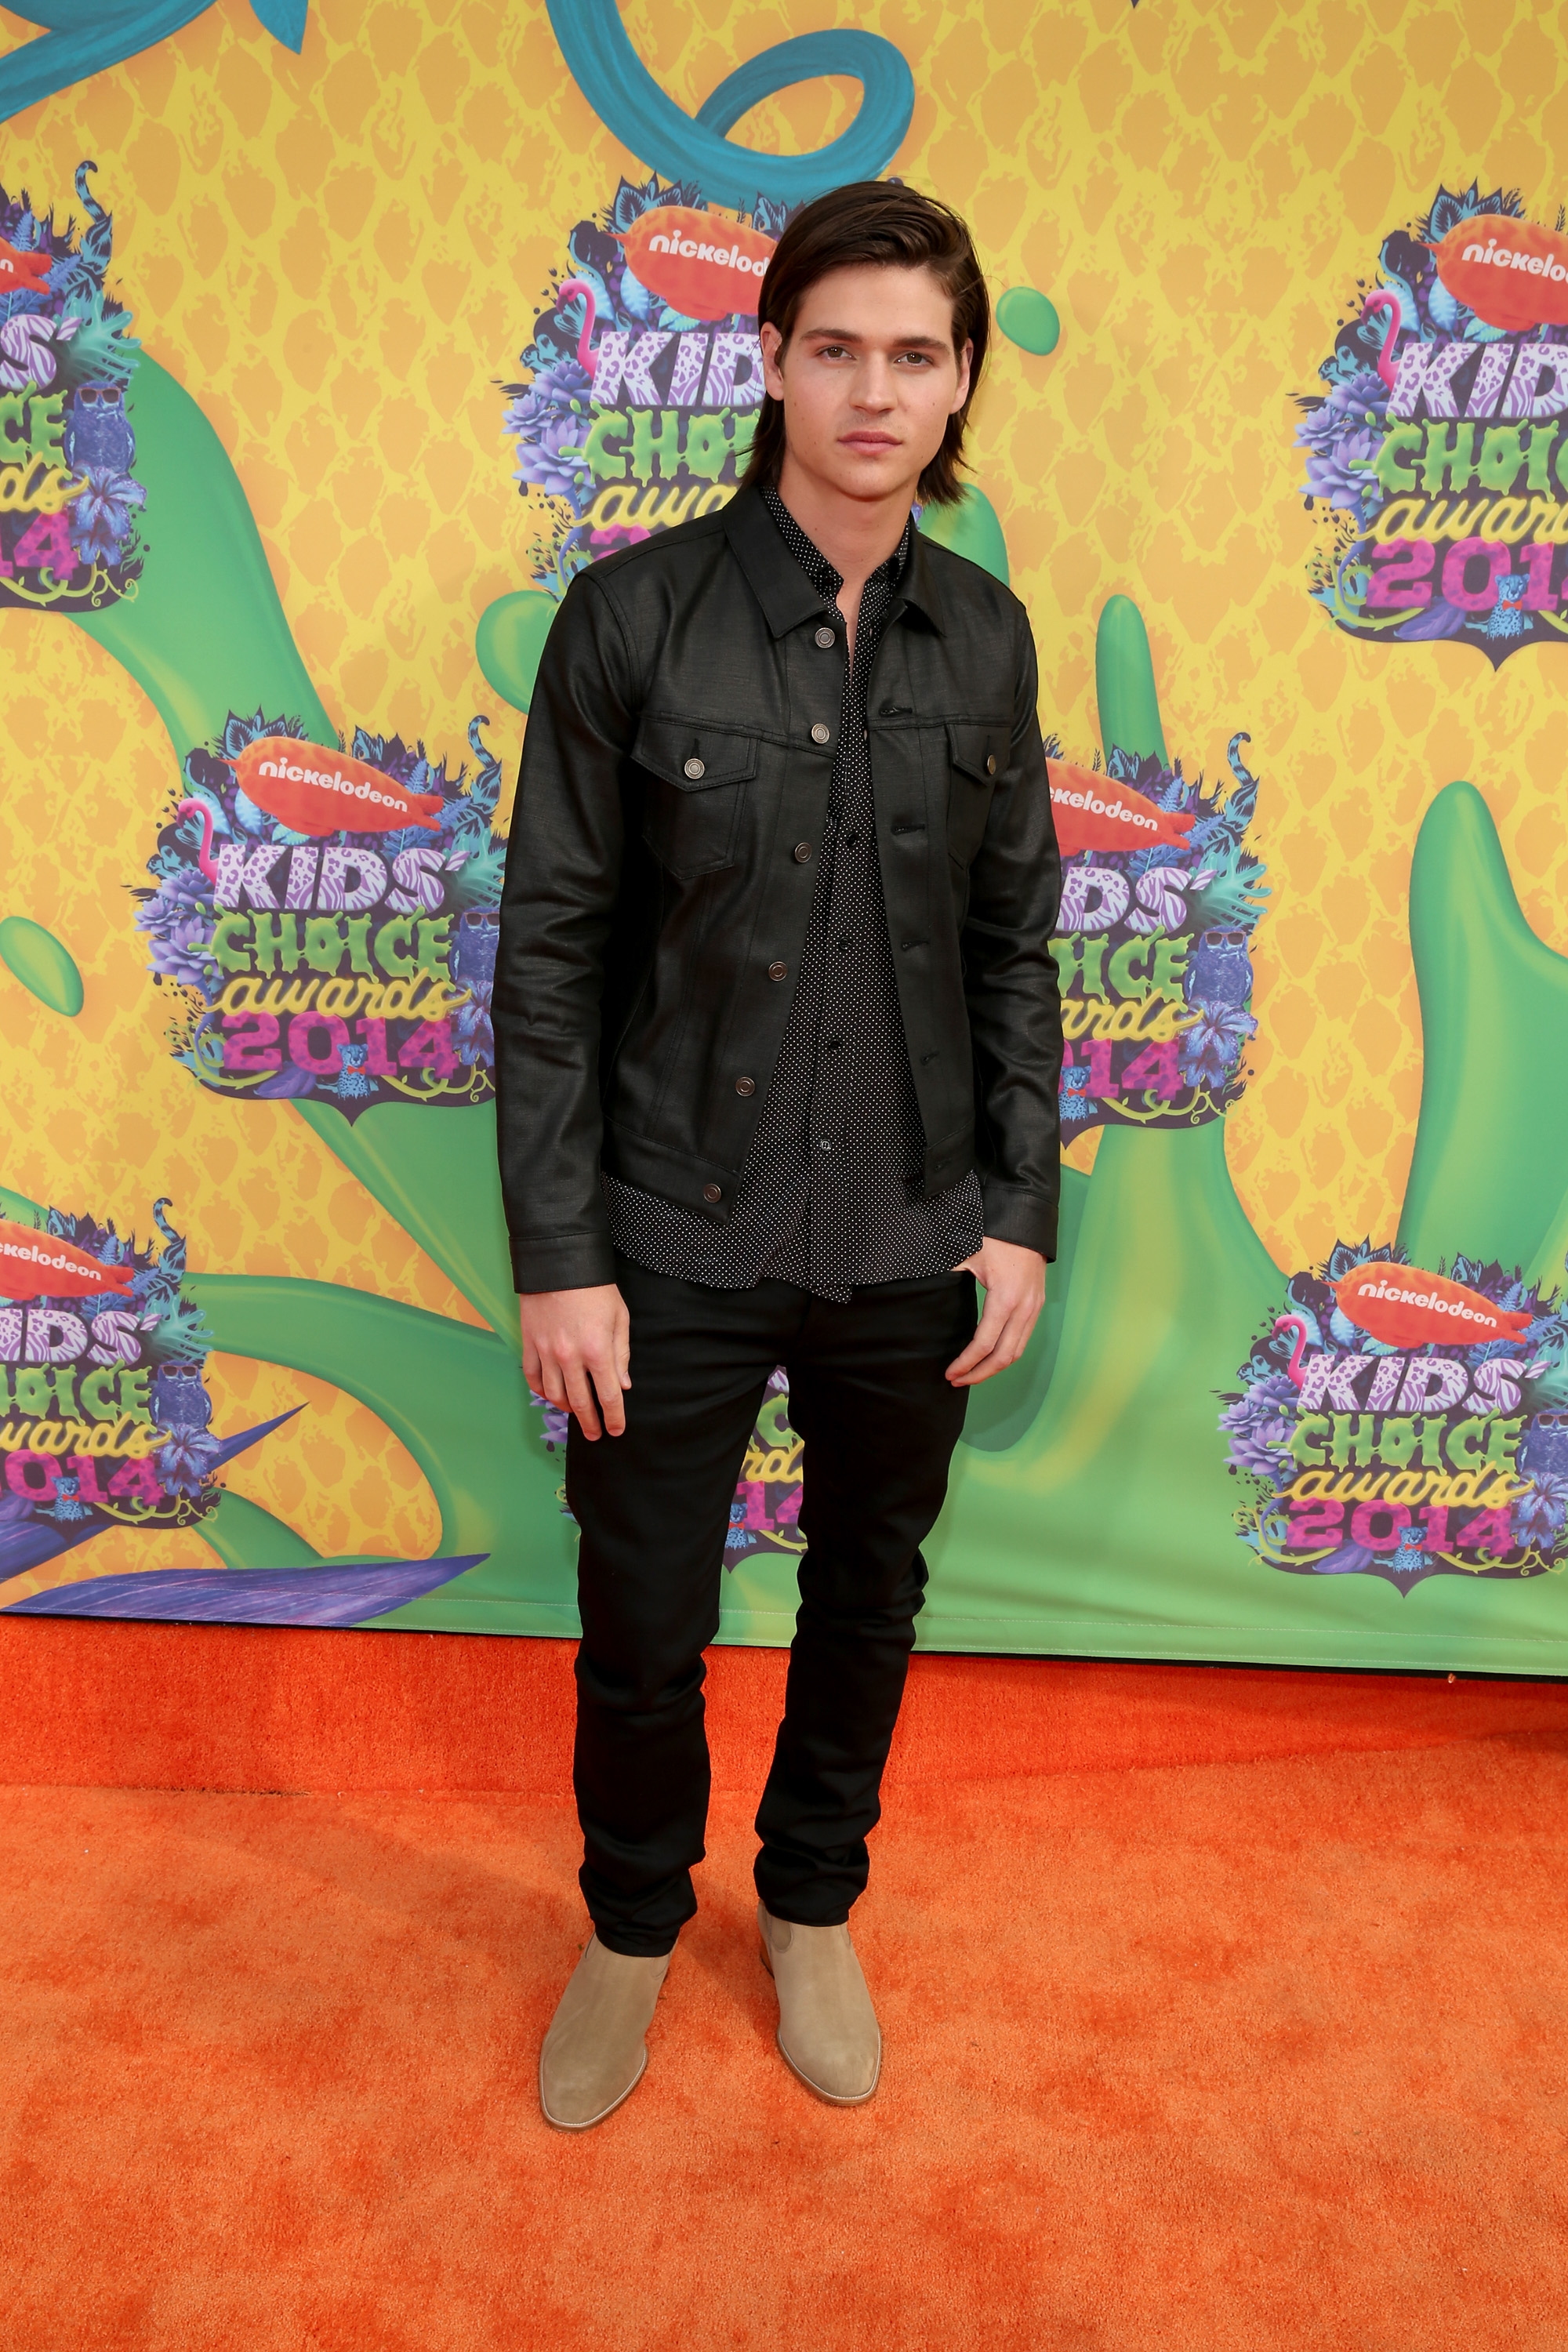 Will Peltz attends Nickelodeon's 27th Annual Kids' Choice Awards held at USC Galen Center on March 29, 2014 in Los Angeles, California